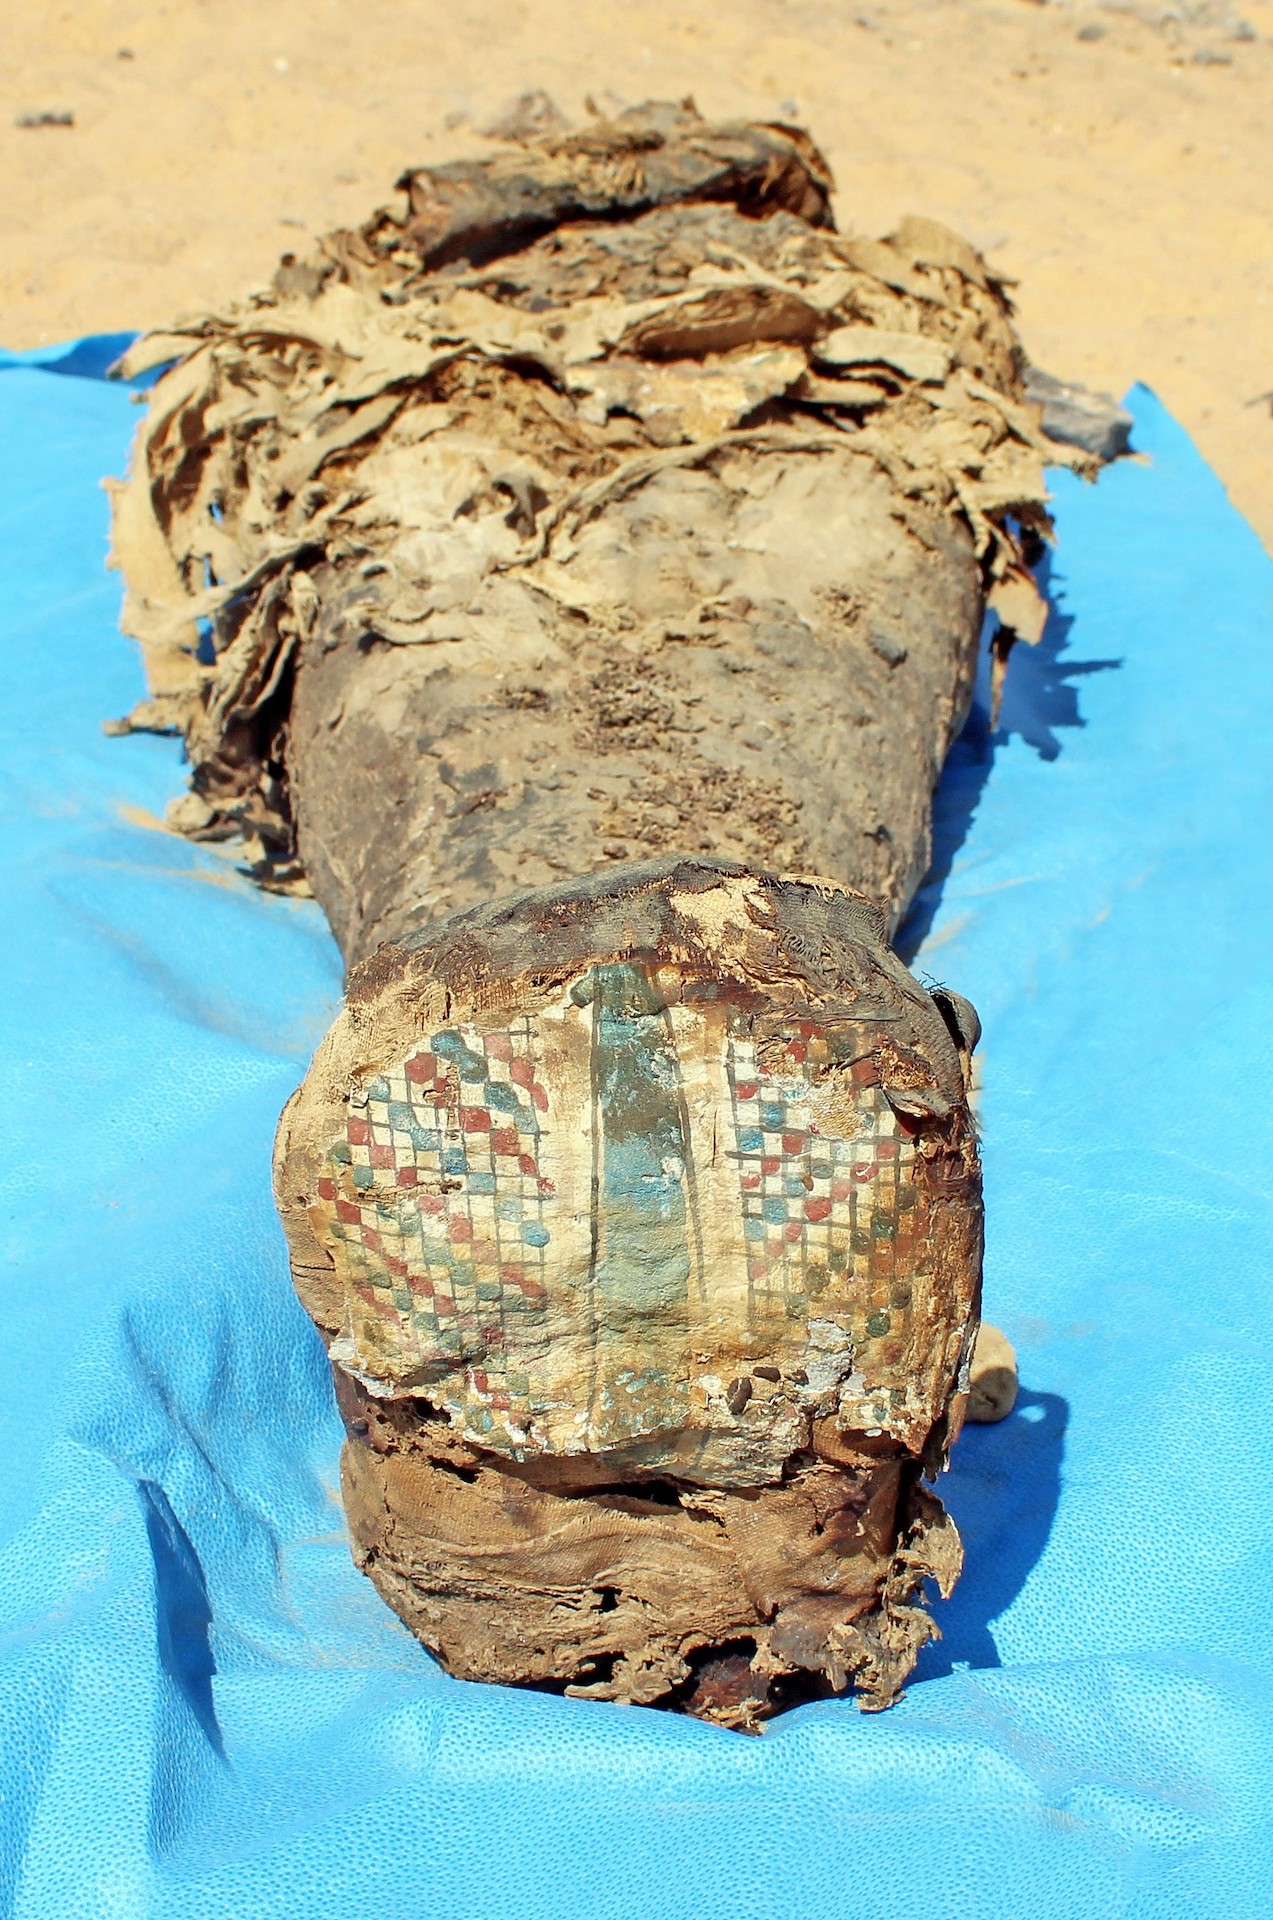 A mummy with cartonnage covering the feet.